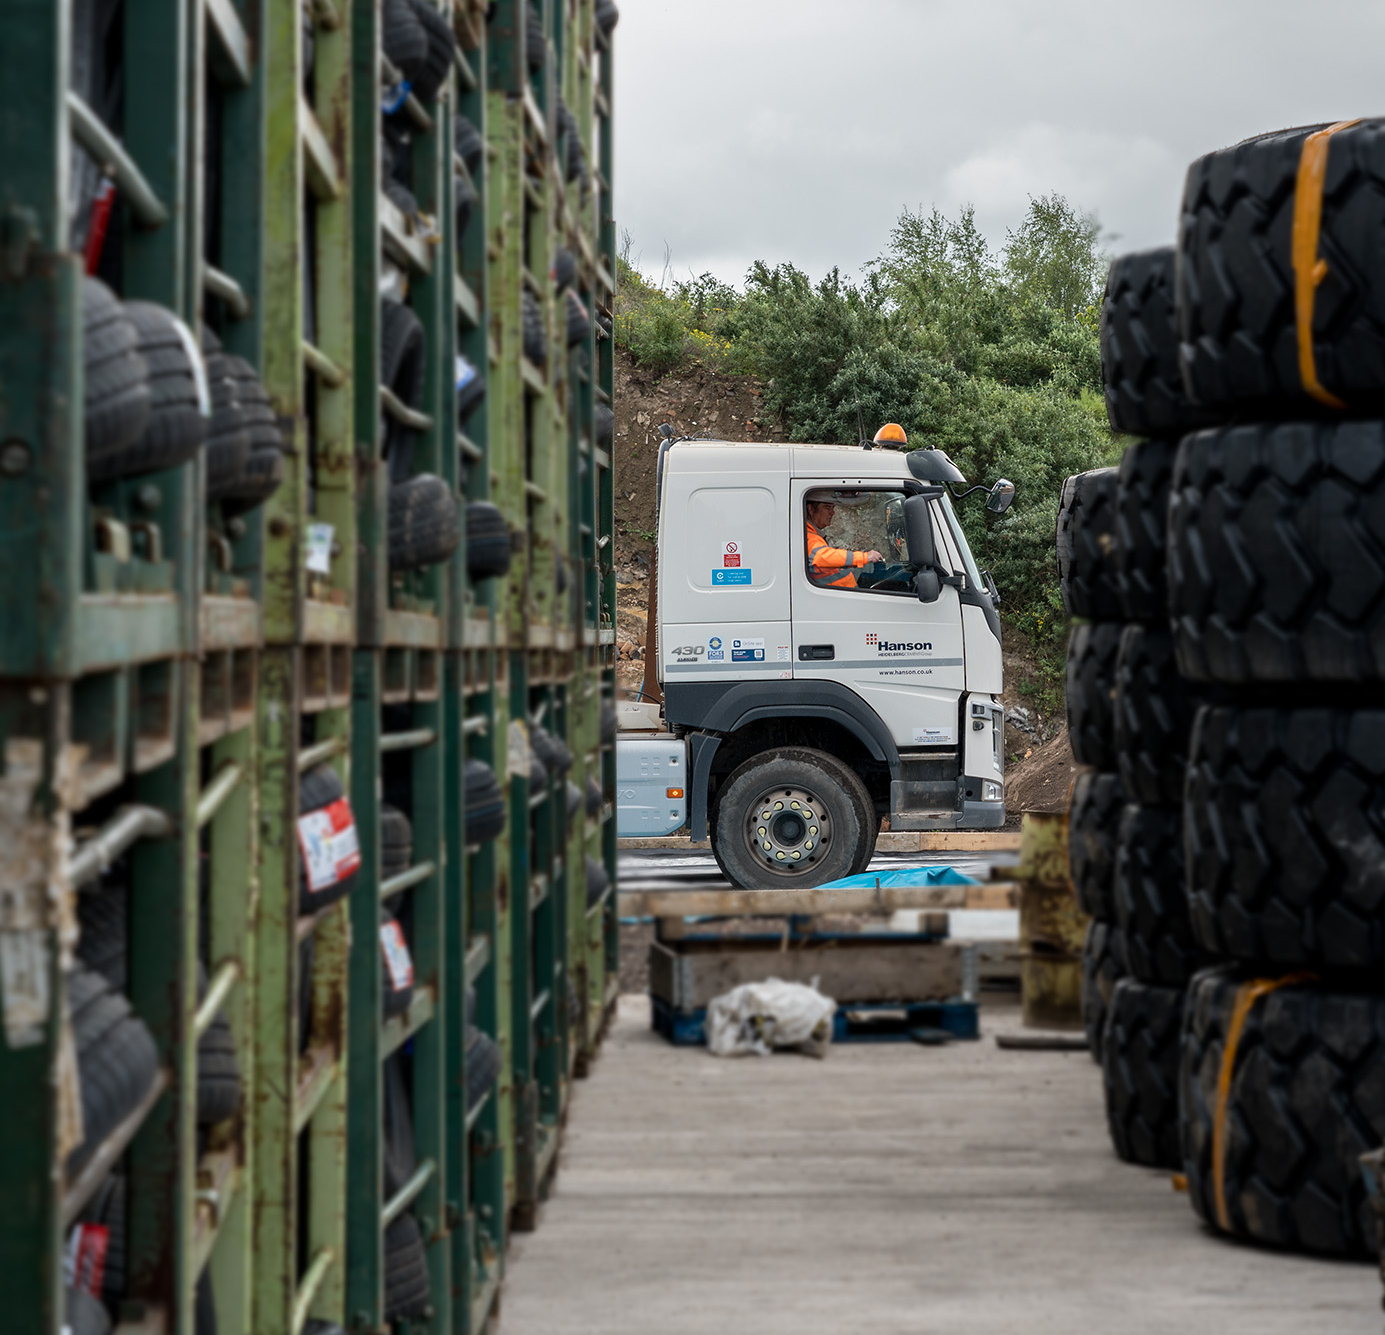 GB Tyres constructing “one of the largest stockholdings in Europe” with new Oldbury site